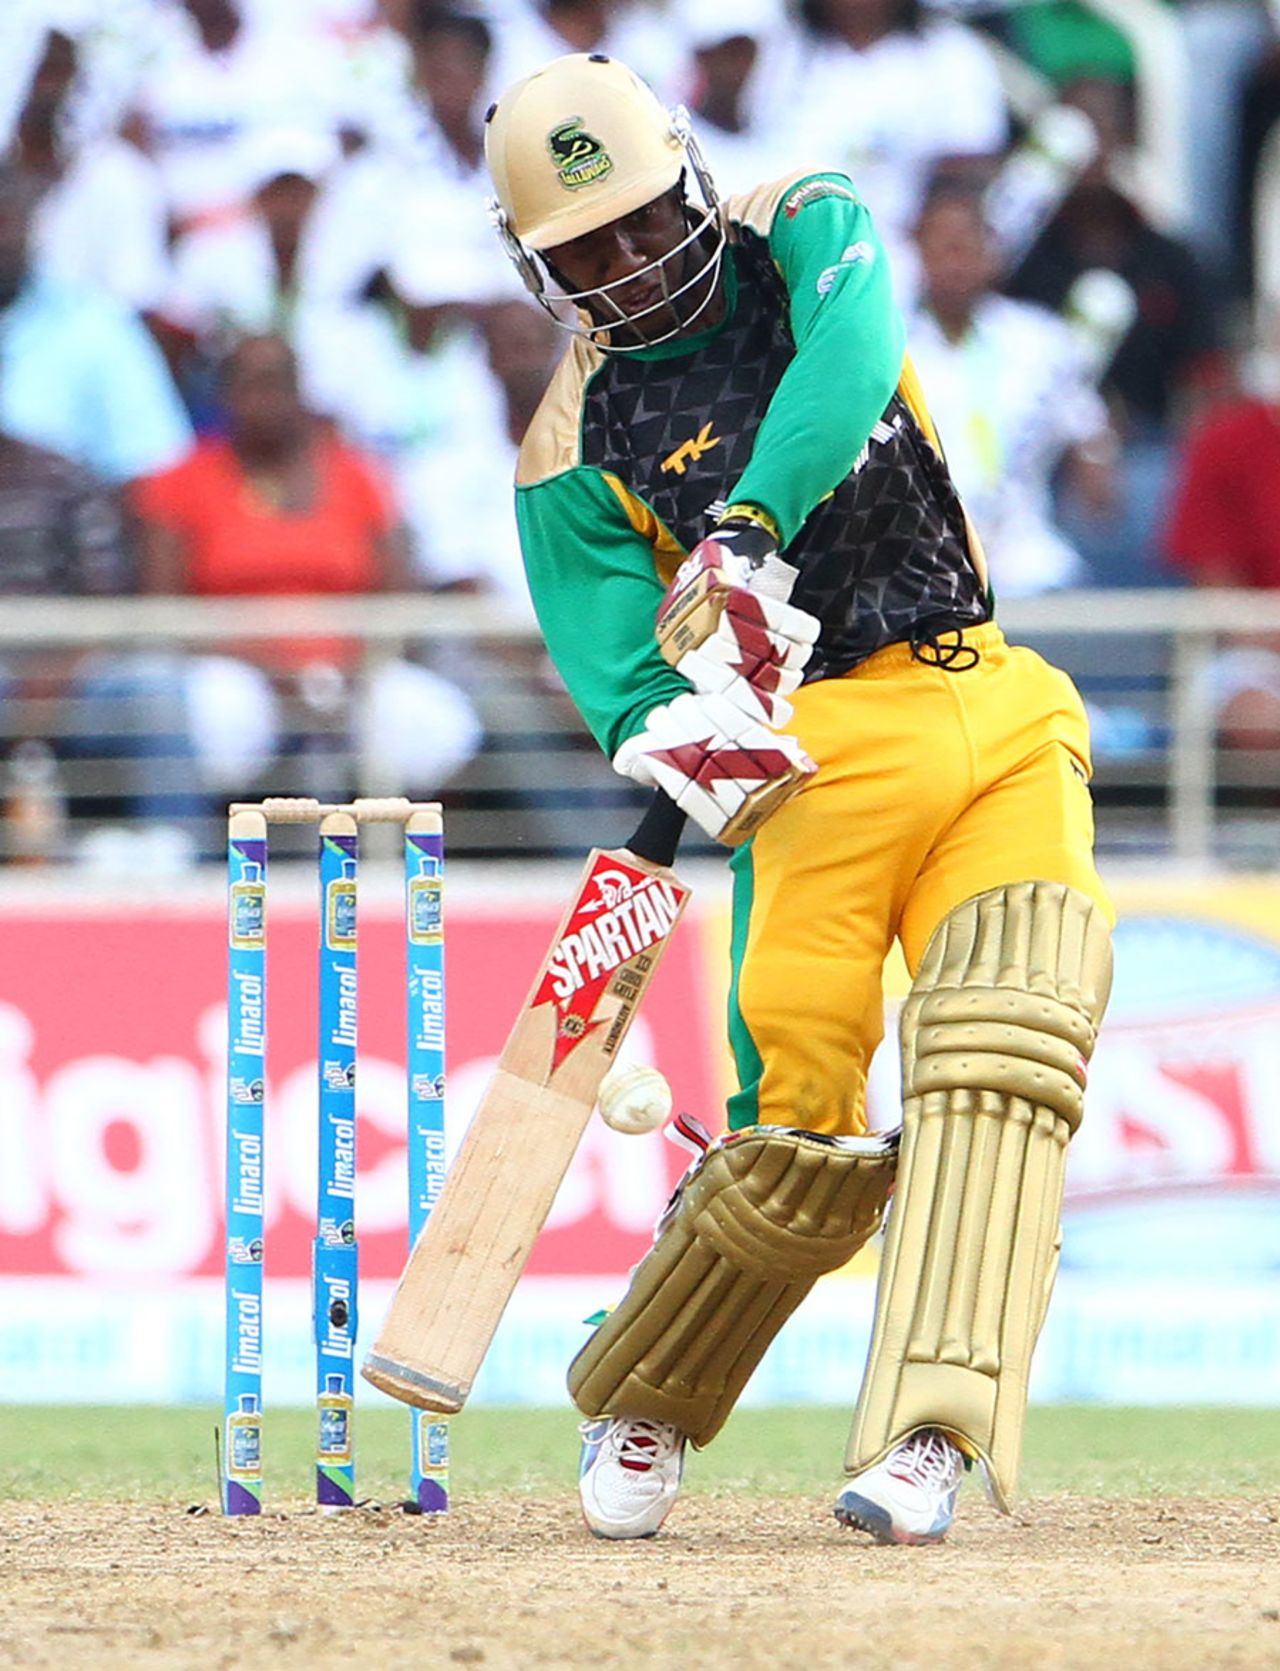 Jermaine Blackwood steps out for an attacking loft, Jamaica Tallawahs v Barbados Tridents, Caribbean Premier League 2013, Jamaica, August 17, 2013